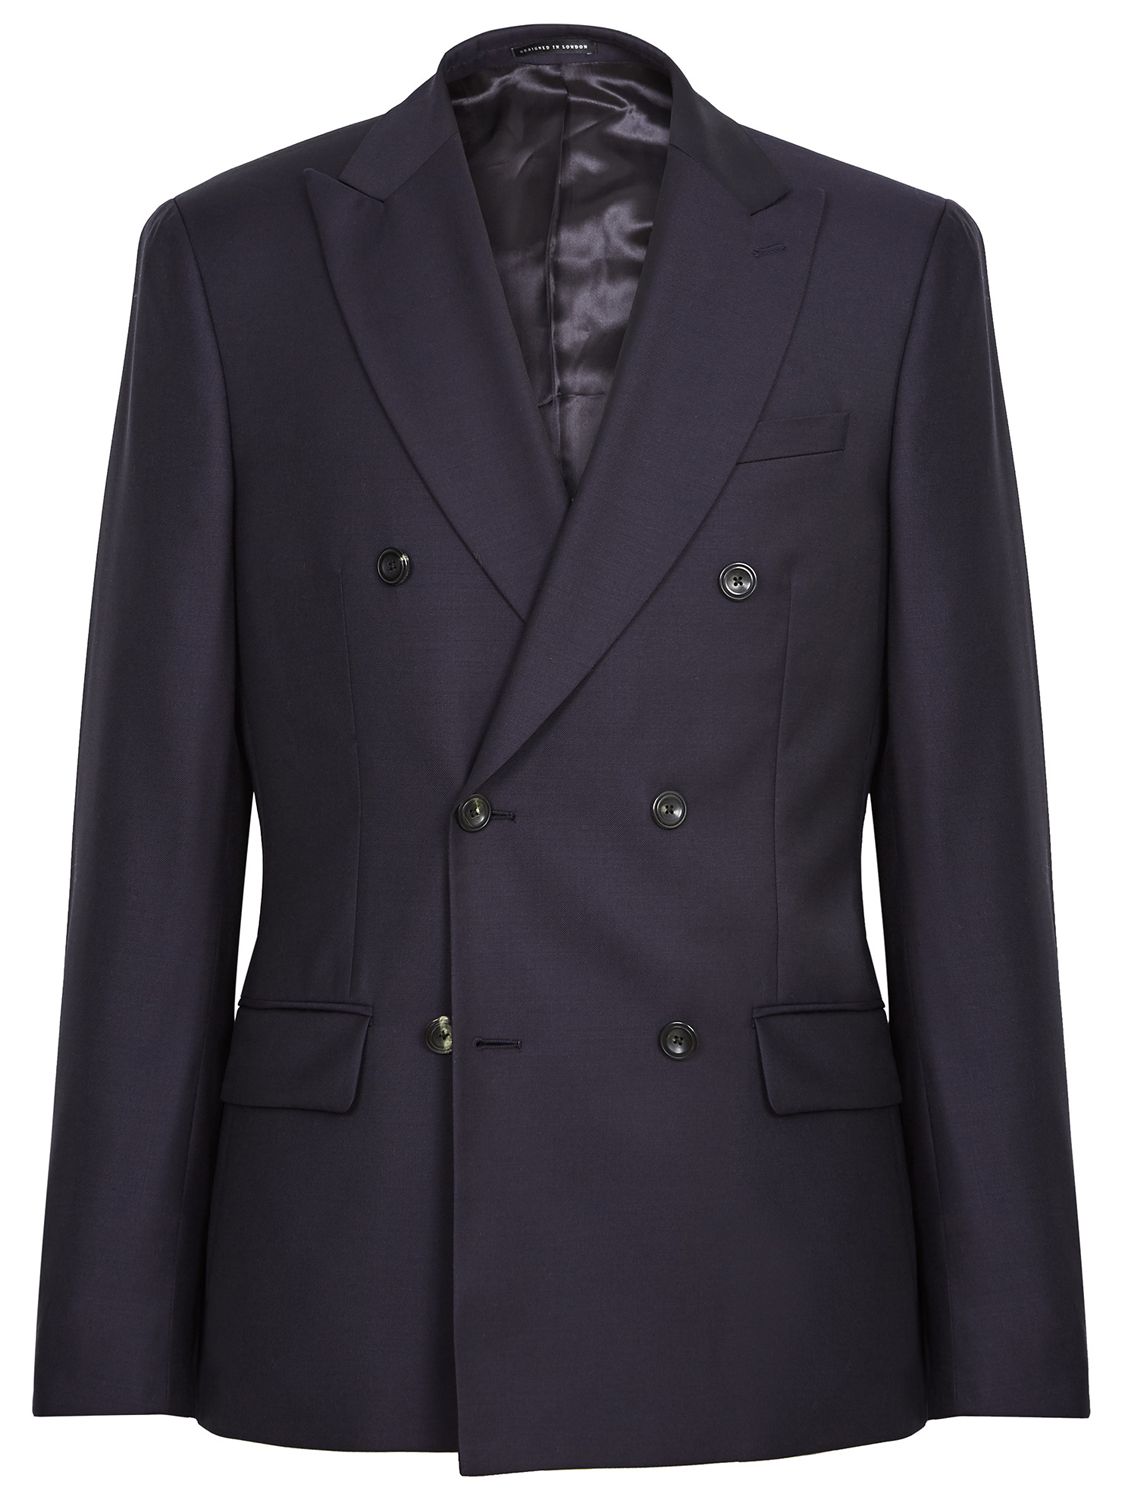 Reiss Carlotta Double Breasted Slim Fit Suit Jacket, Navy